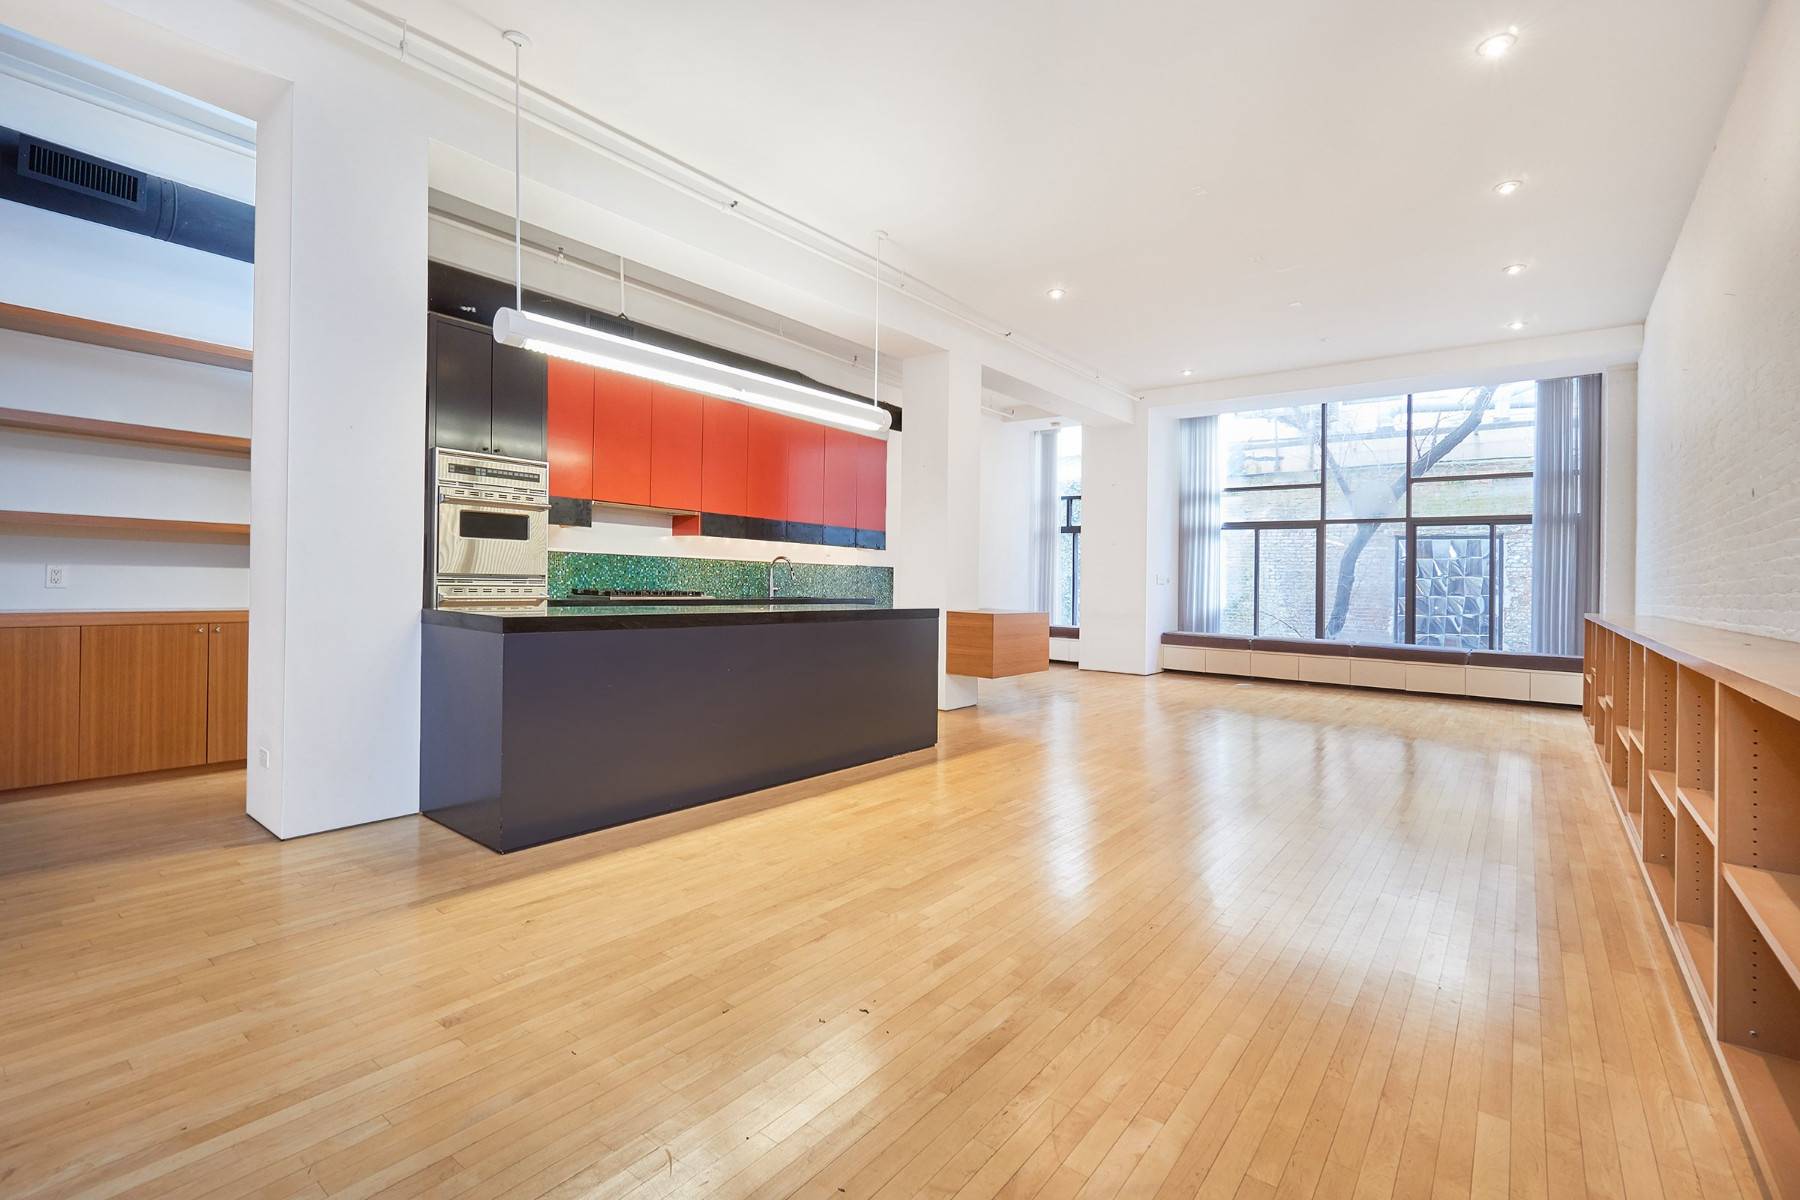 Huge Duplex SoHo loft with private OUTDOOR space brings a serene twist to a lively cosmopolitan neighborhood.